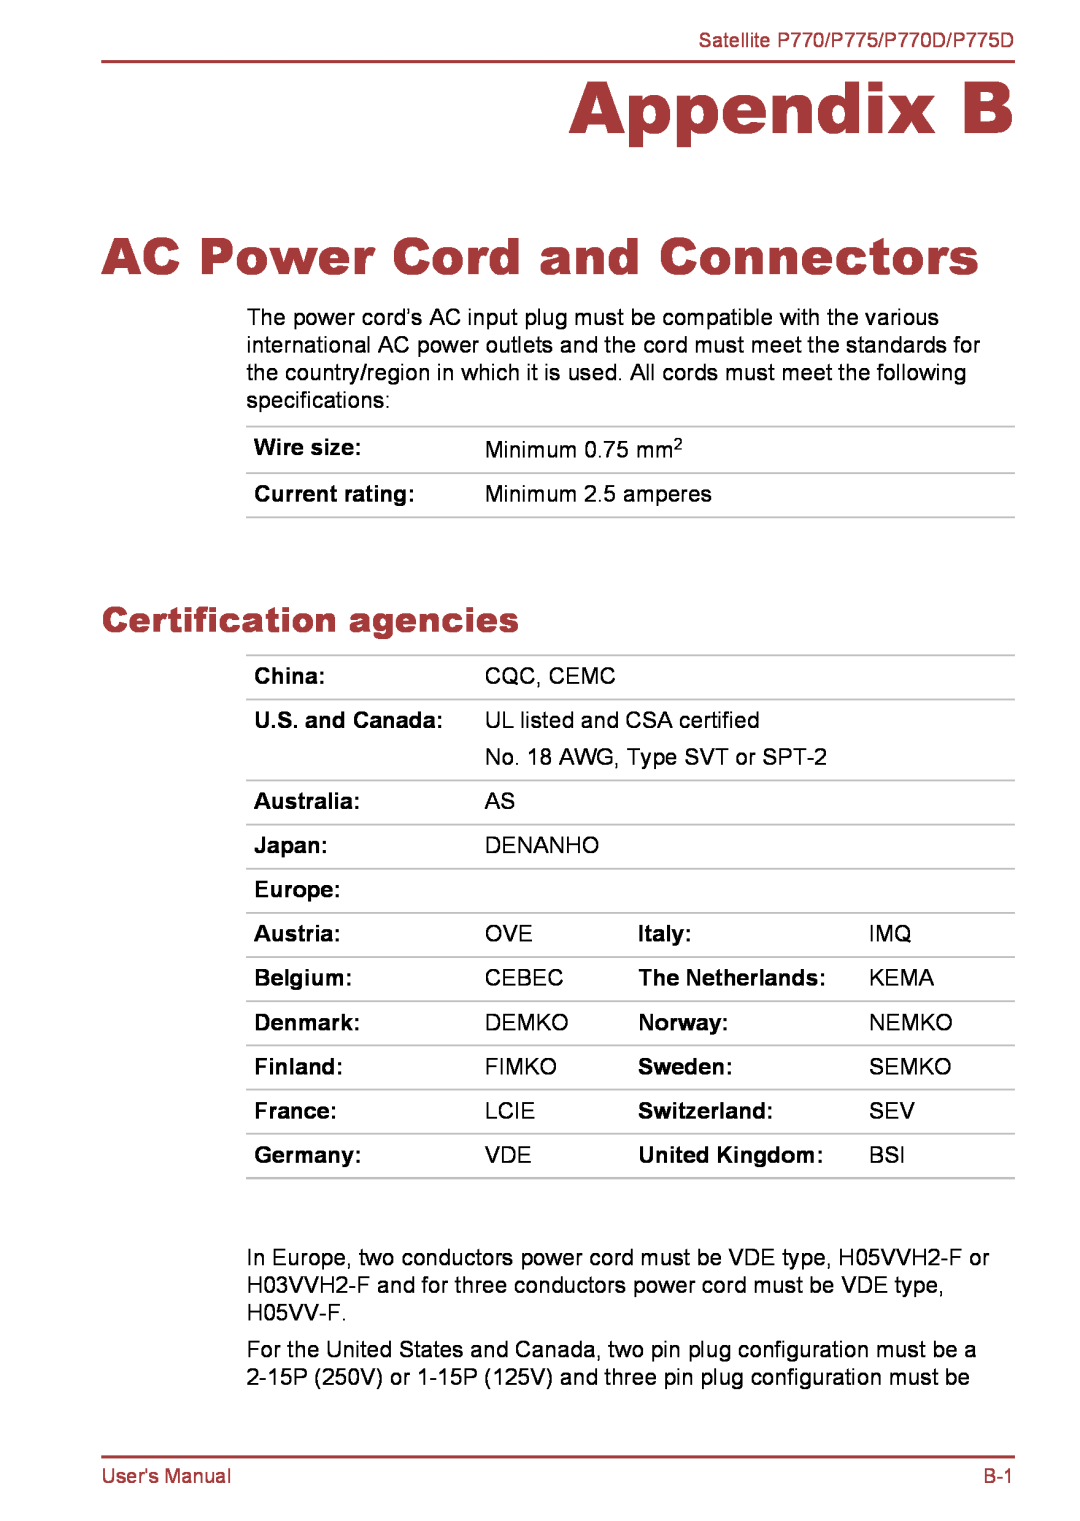 Toshiba P770 Appendix B, AC Power Cord and Connectors, Certification agencies, Wire size, Minimum 0.75 mm, Current rating 